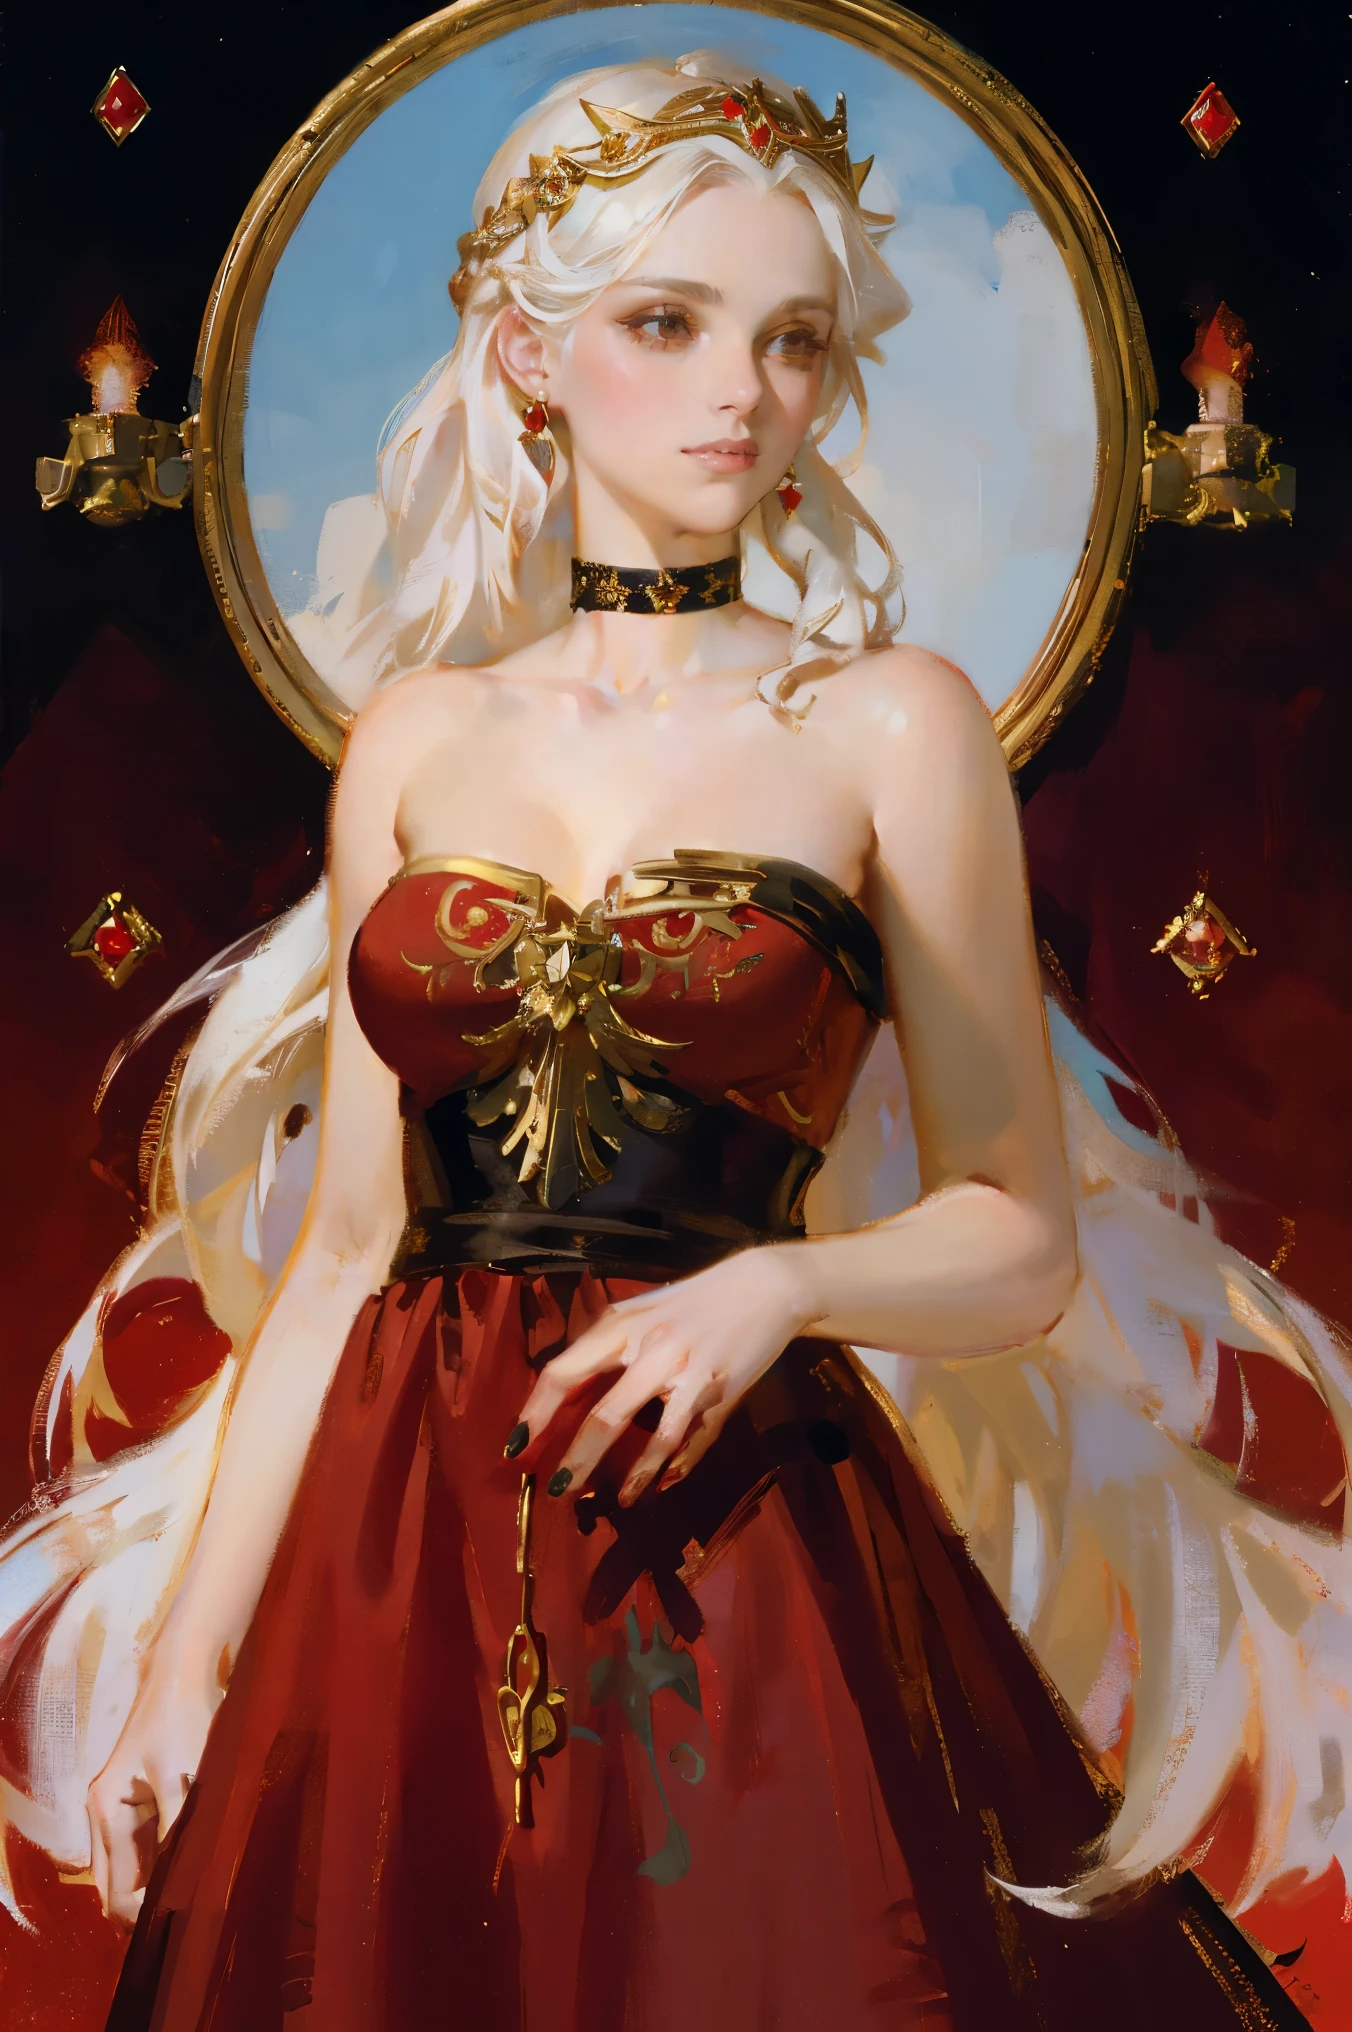 fantasy, princess Targaryen, full-length, garden, girl, with white hair, face looks like Daenerys|Natalie Portman, in a red and black dress embroidered with gold threads of rubies and diamonds with her eyes open, hd